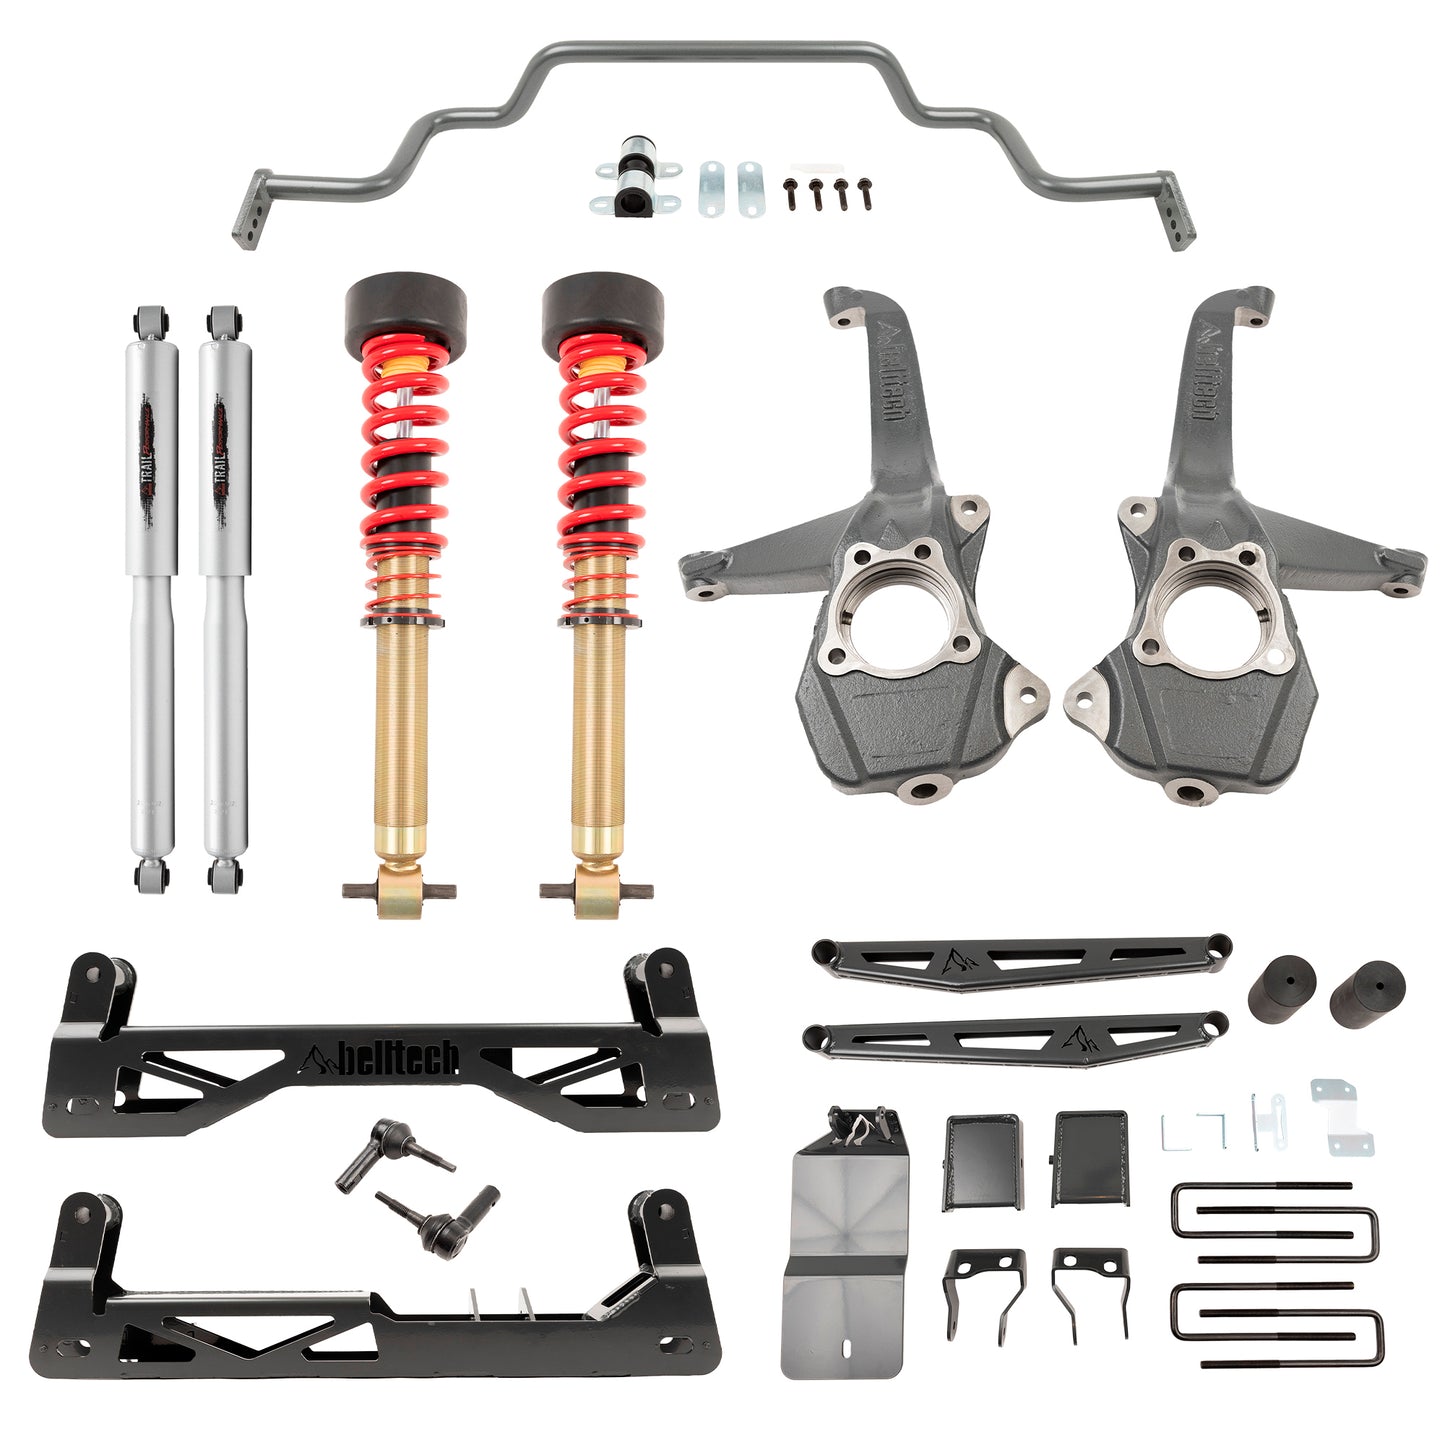 BELLTECH 150210HK LIFT KIT 6-8IN. LIFT KIT INC. FRONT AND REAR TRAIL PERFORMANCE COILOVERS/SHOCKS 2019-2023 GM SILVERADO/SIERRA 1500 2WD/4WD 6-8IN. LIFT WITH TRAIL PEFORMANCE COILOVERS/SHOCKS